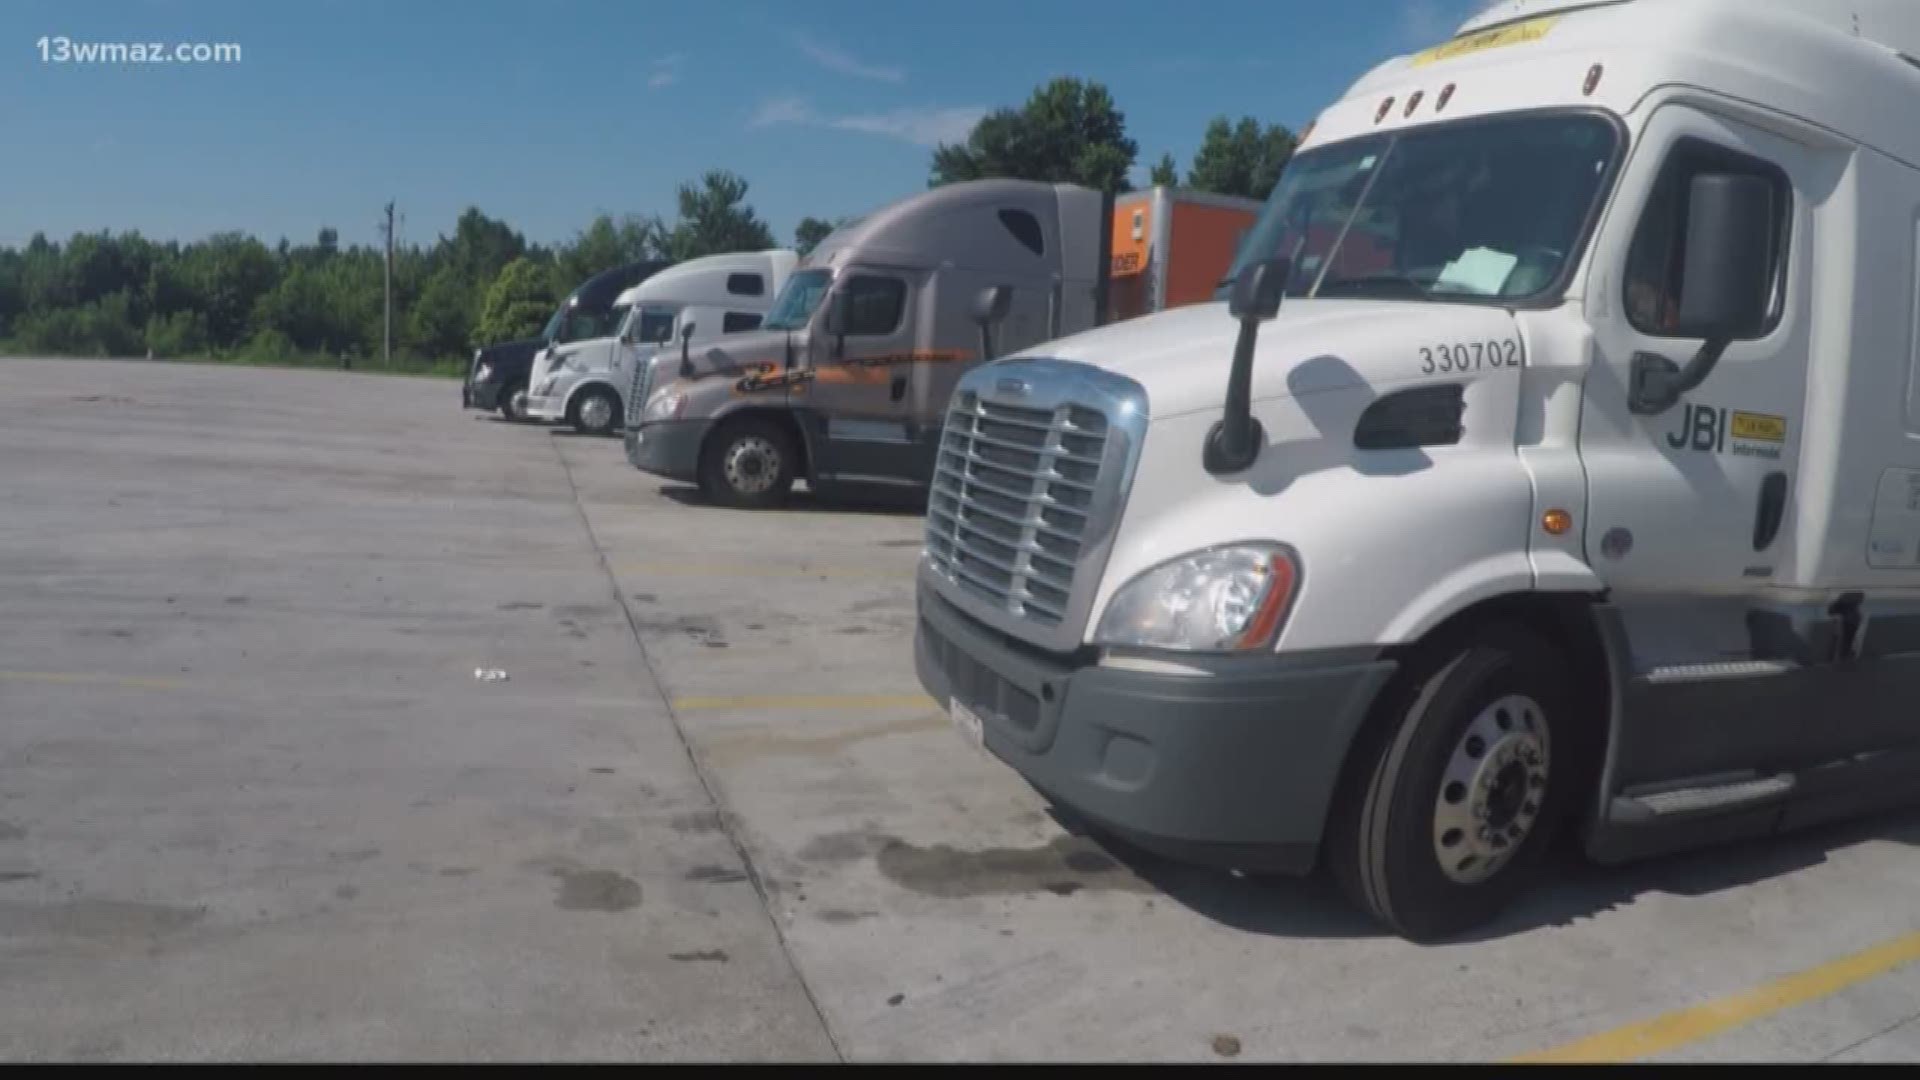 Truck drivers hopeful hands-free law will reduce distracted driving